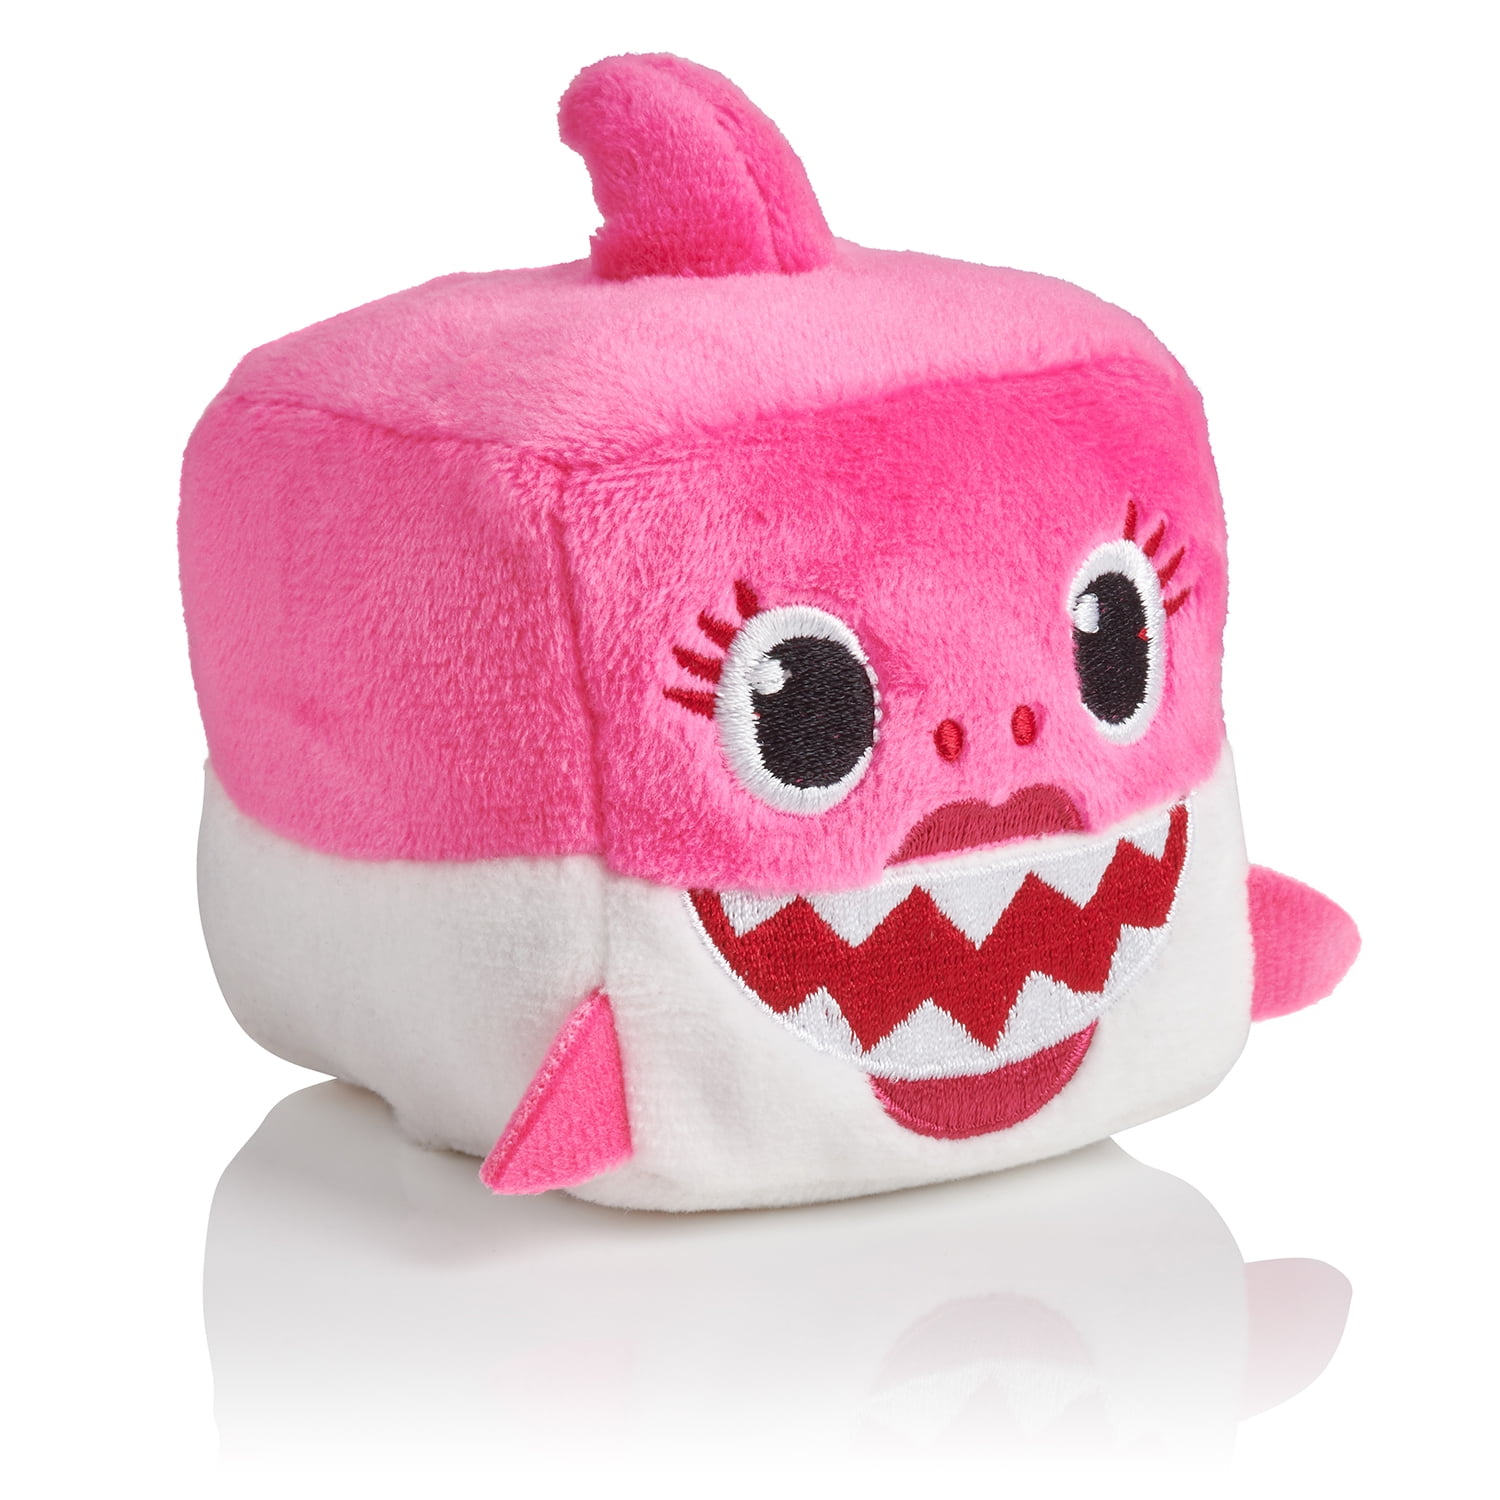 WowWee Pinkfong Baby Shark`s Plush Mini - NEW W/TAG!!! 5 DIFFERENT